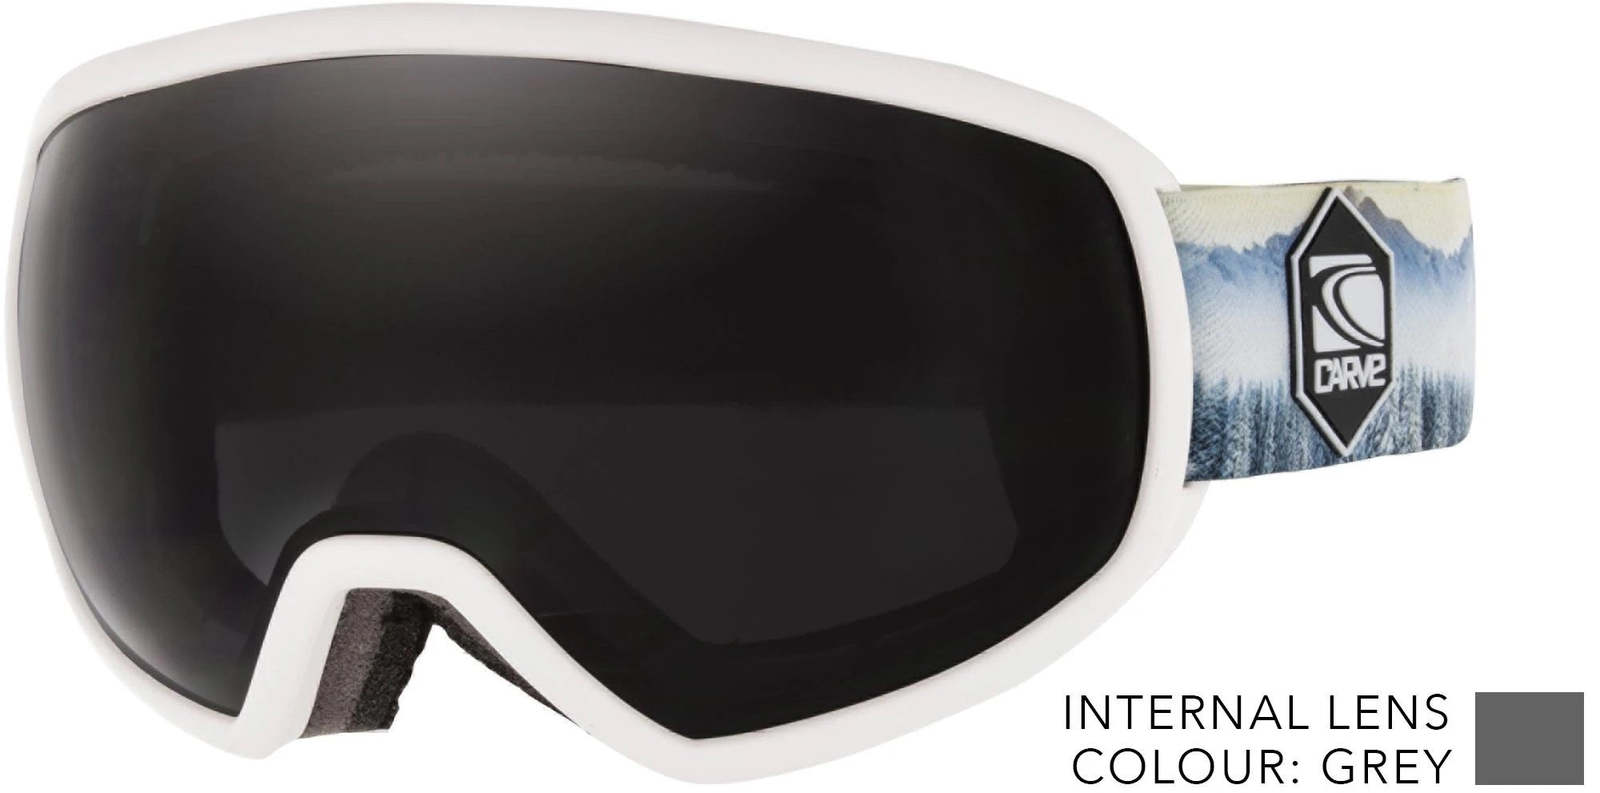 Primary image for Carve eyewear SHOOTS snow goggle